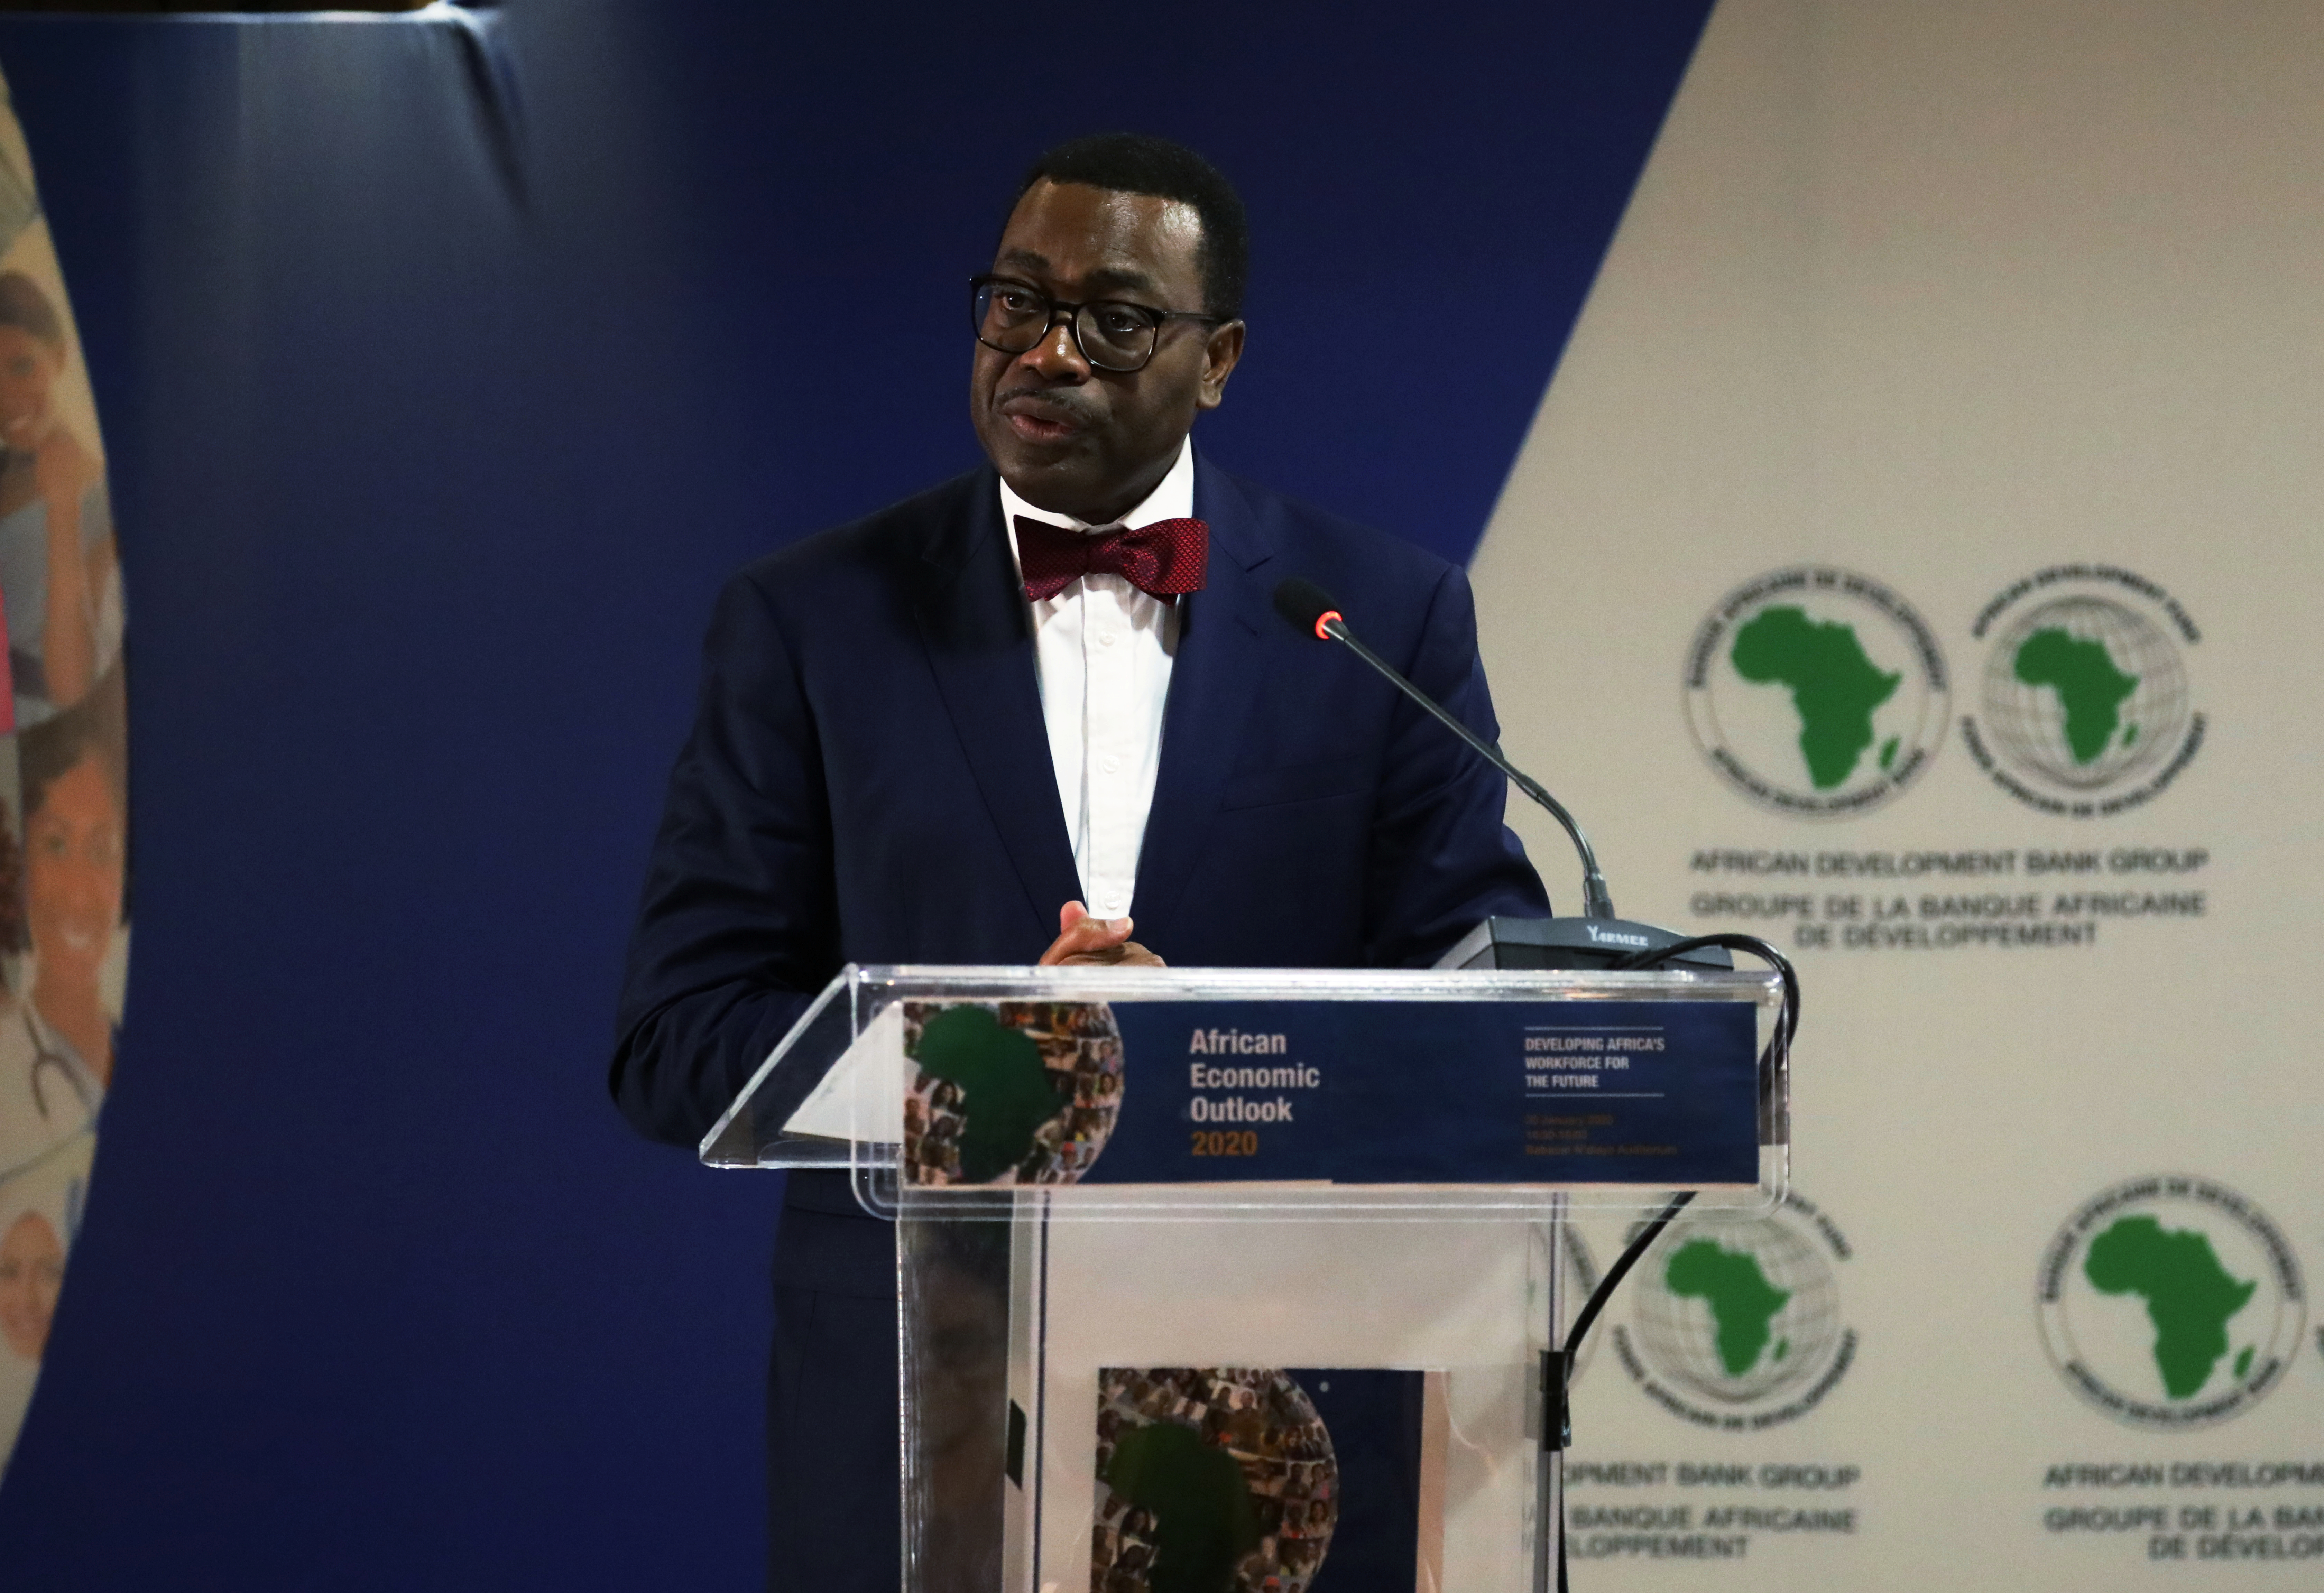 Akinwumi Ayodeji Adesina, President of the African Development Bank Group, attends a meeting of the 2020 African Economic Outlook report in Abidjan, Ivory Coast January 30, 2020. REUTERS/Luc Gnago